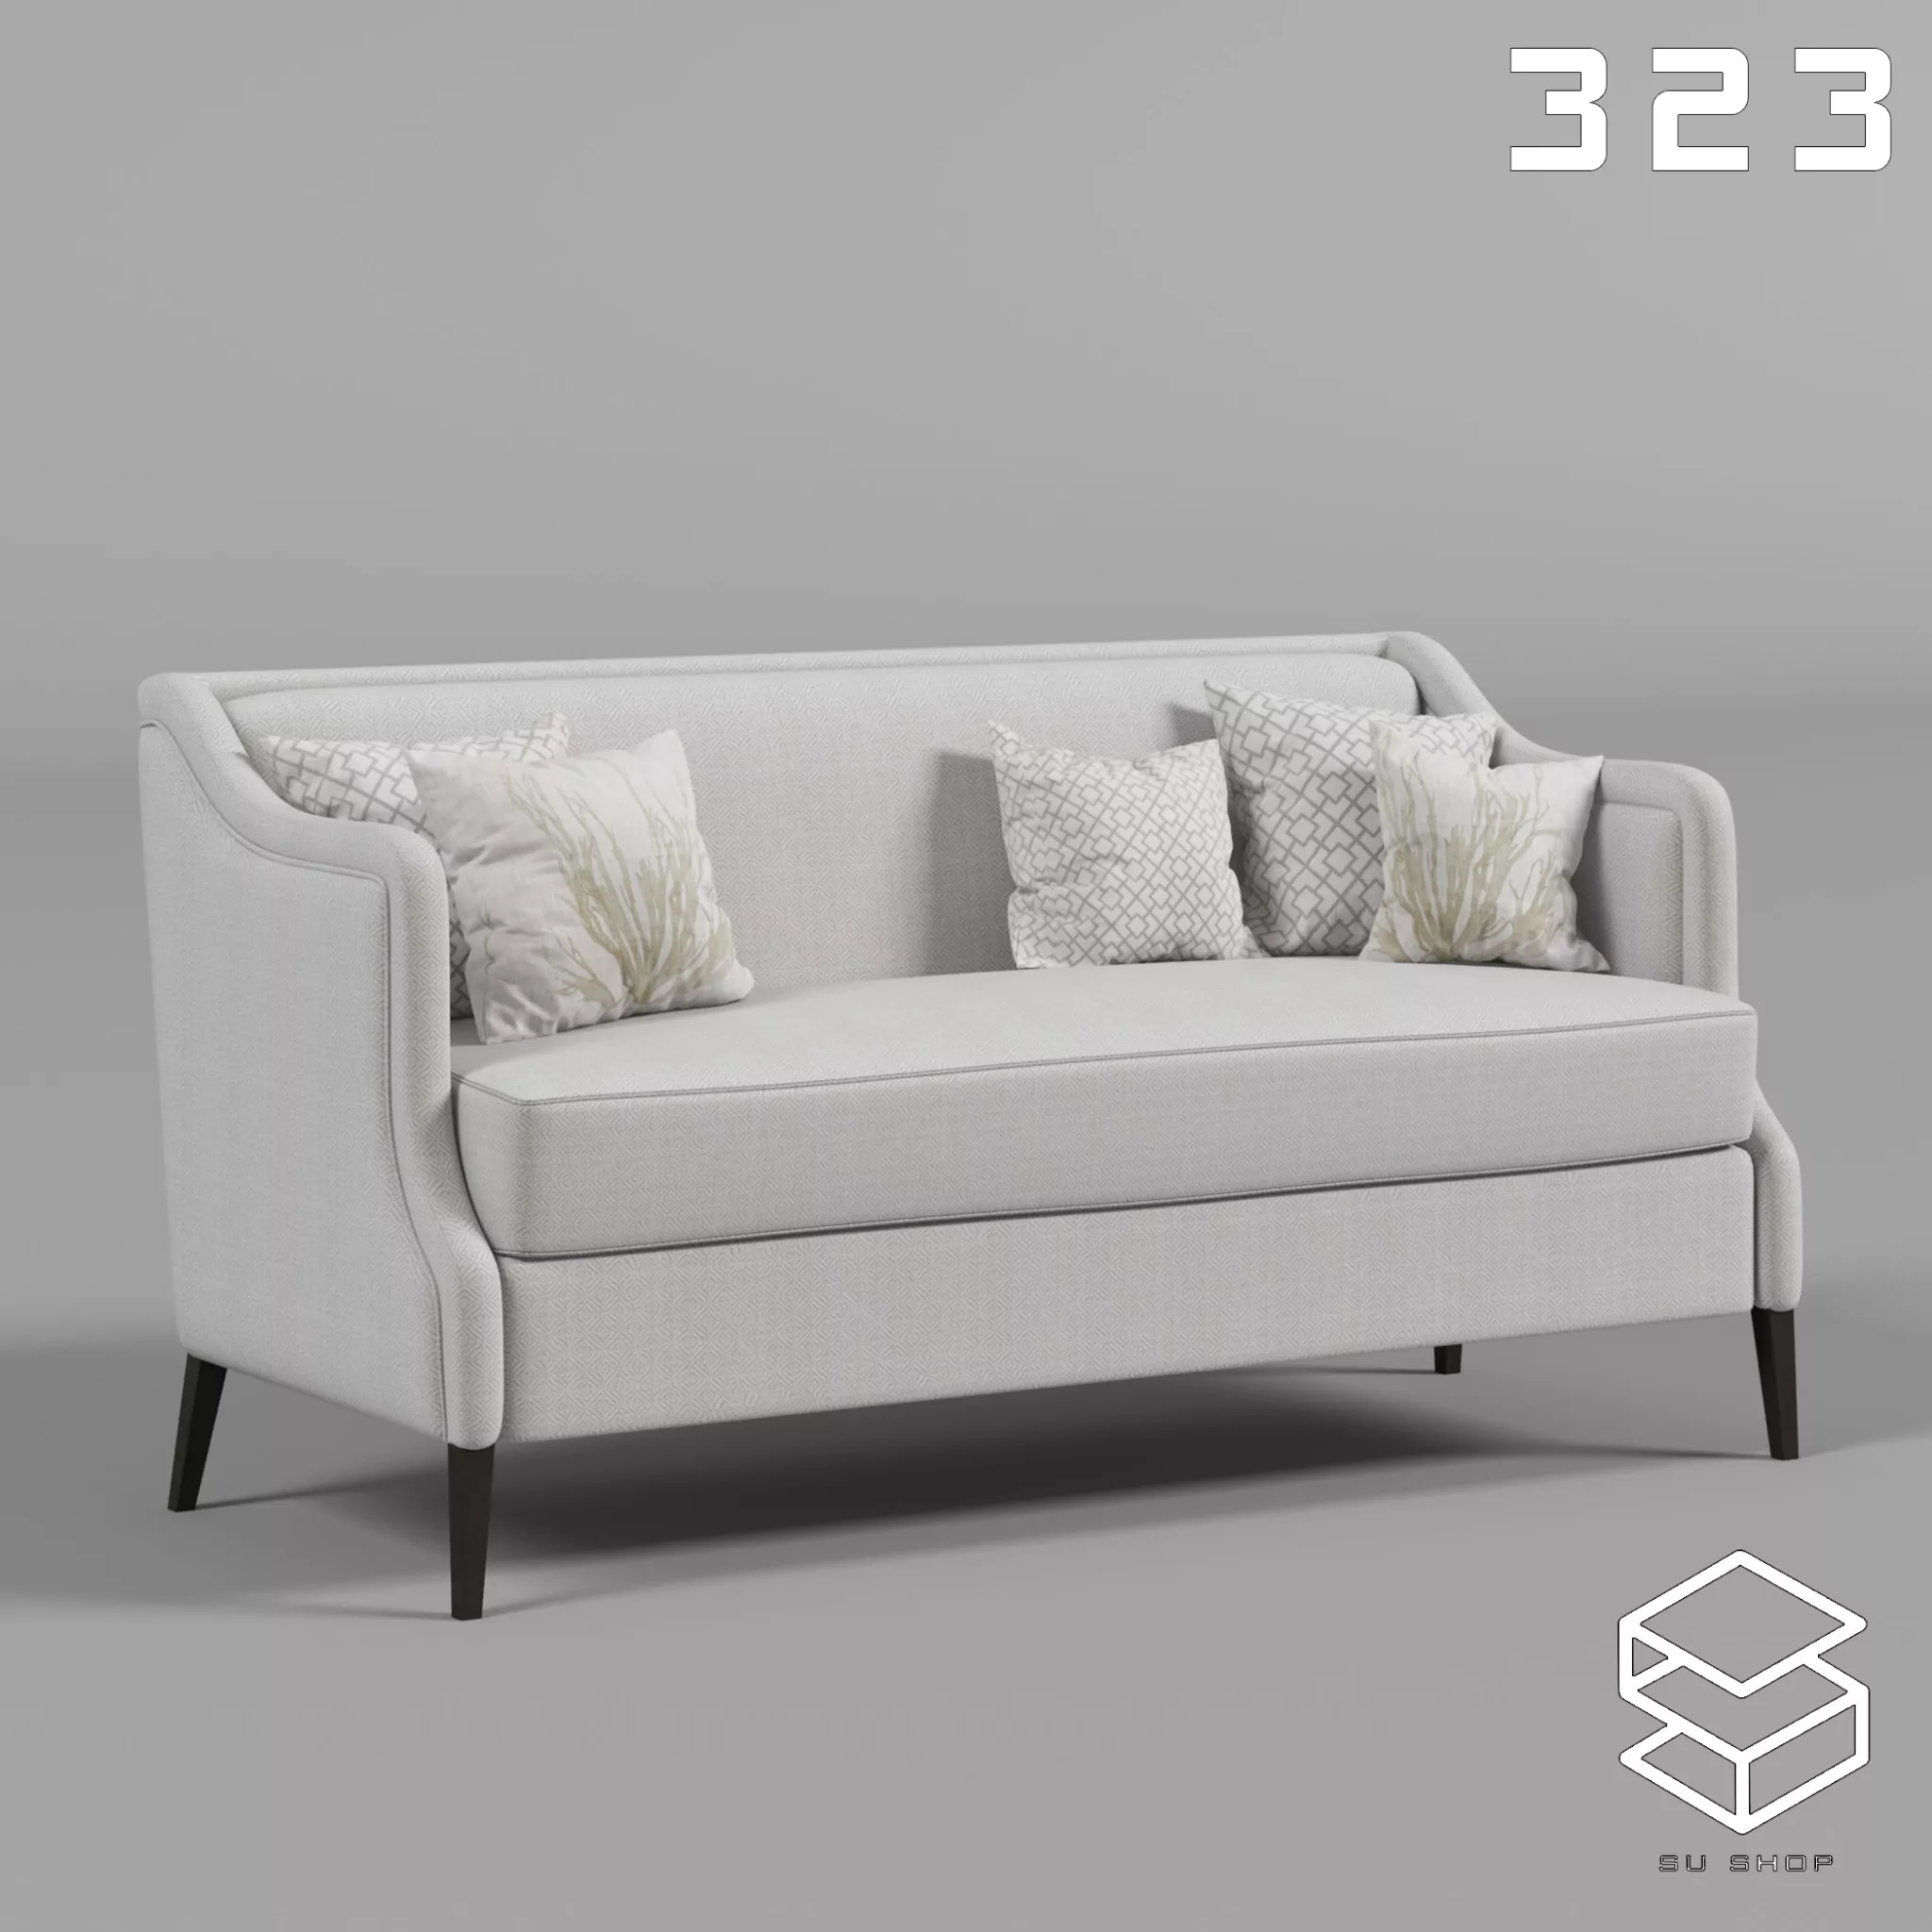 MODERN SOFA - SKETCHUP 3D MODEL - VRAY OR ENSCAPE - ID13634